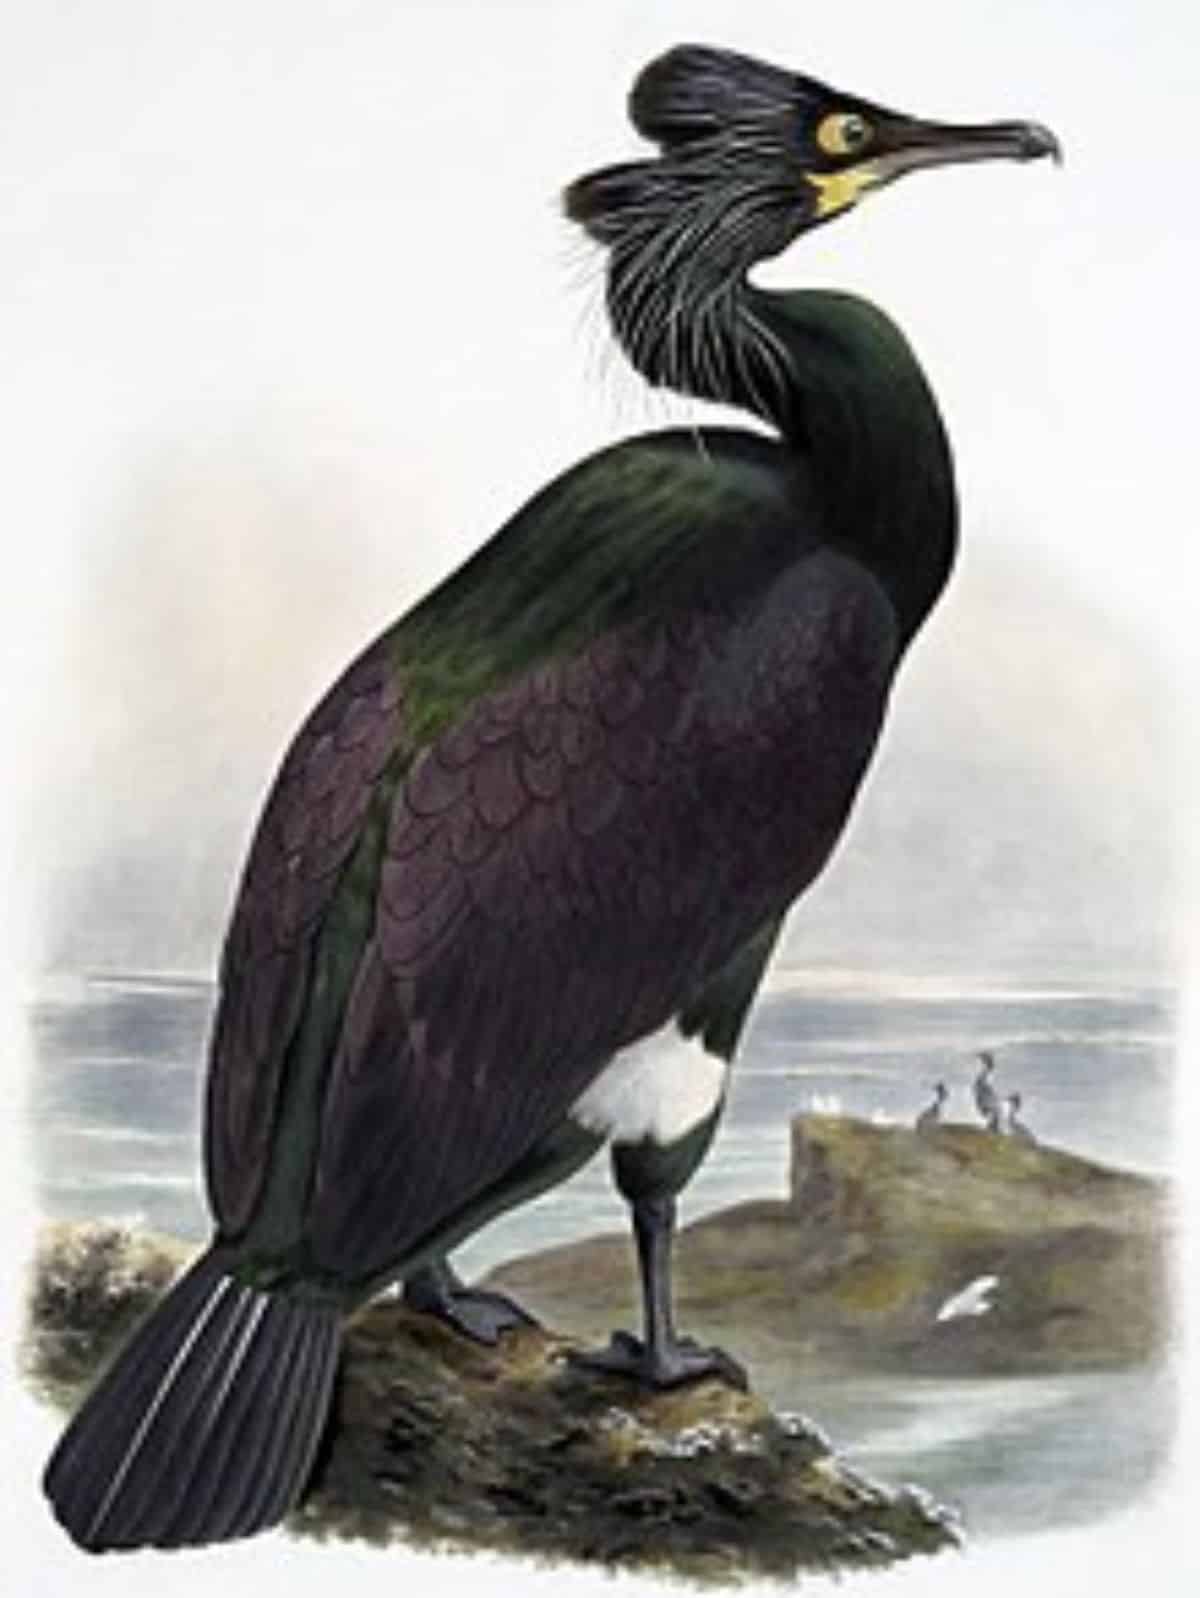 A Spectacled Cormorant drawning.